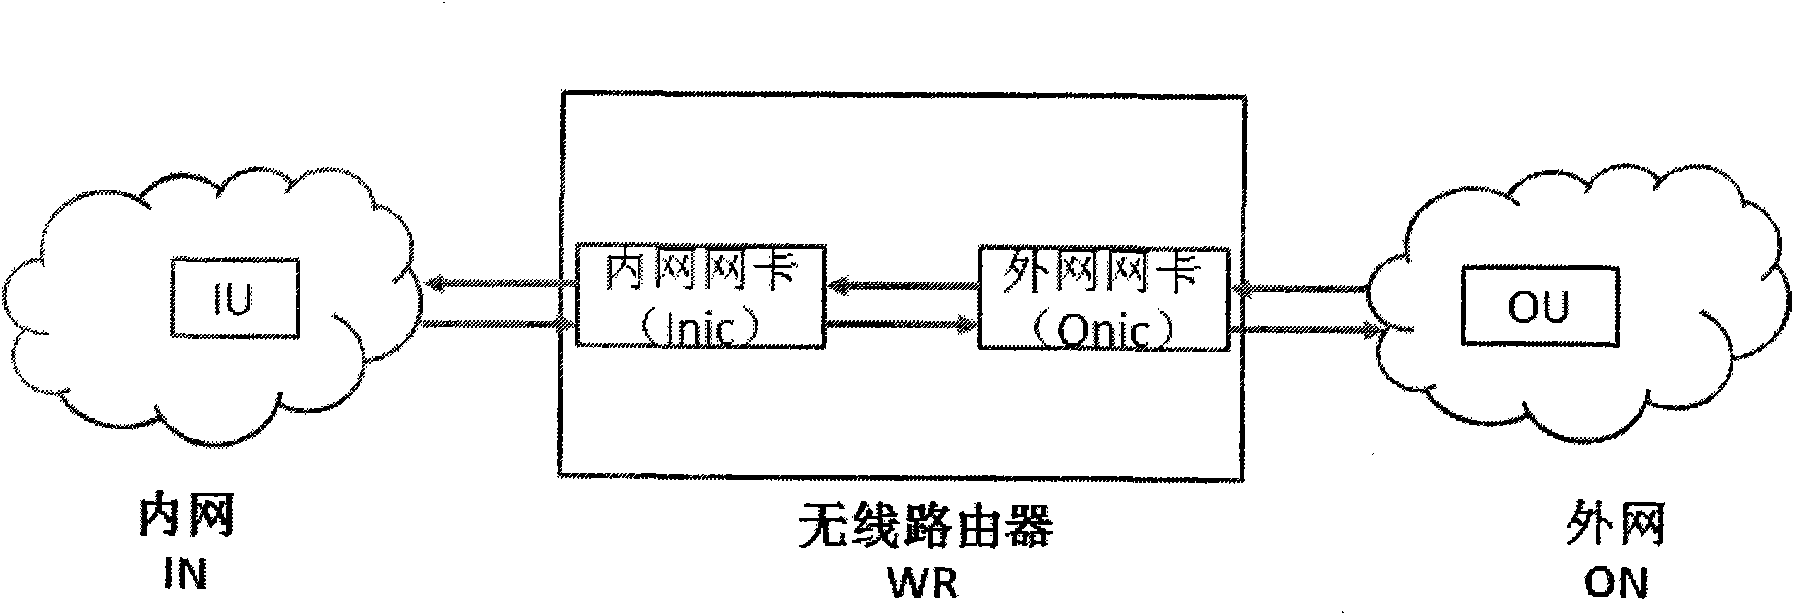 Method for access control based on MAC address conversion in IPv6 wireless router